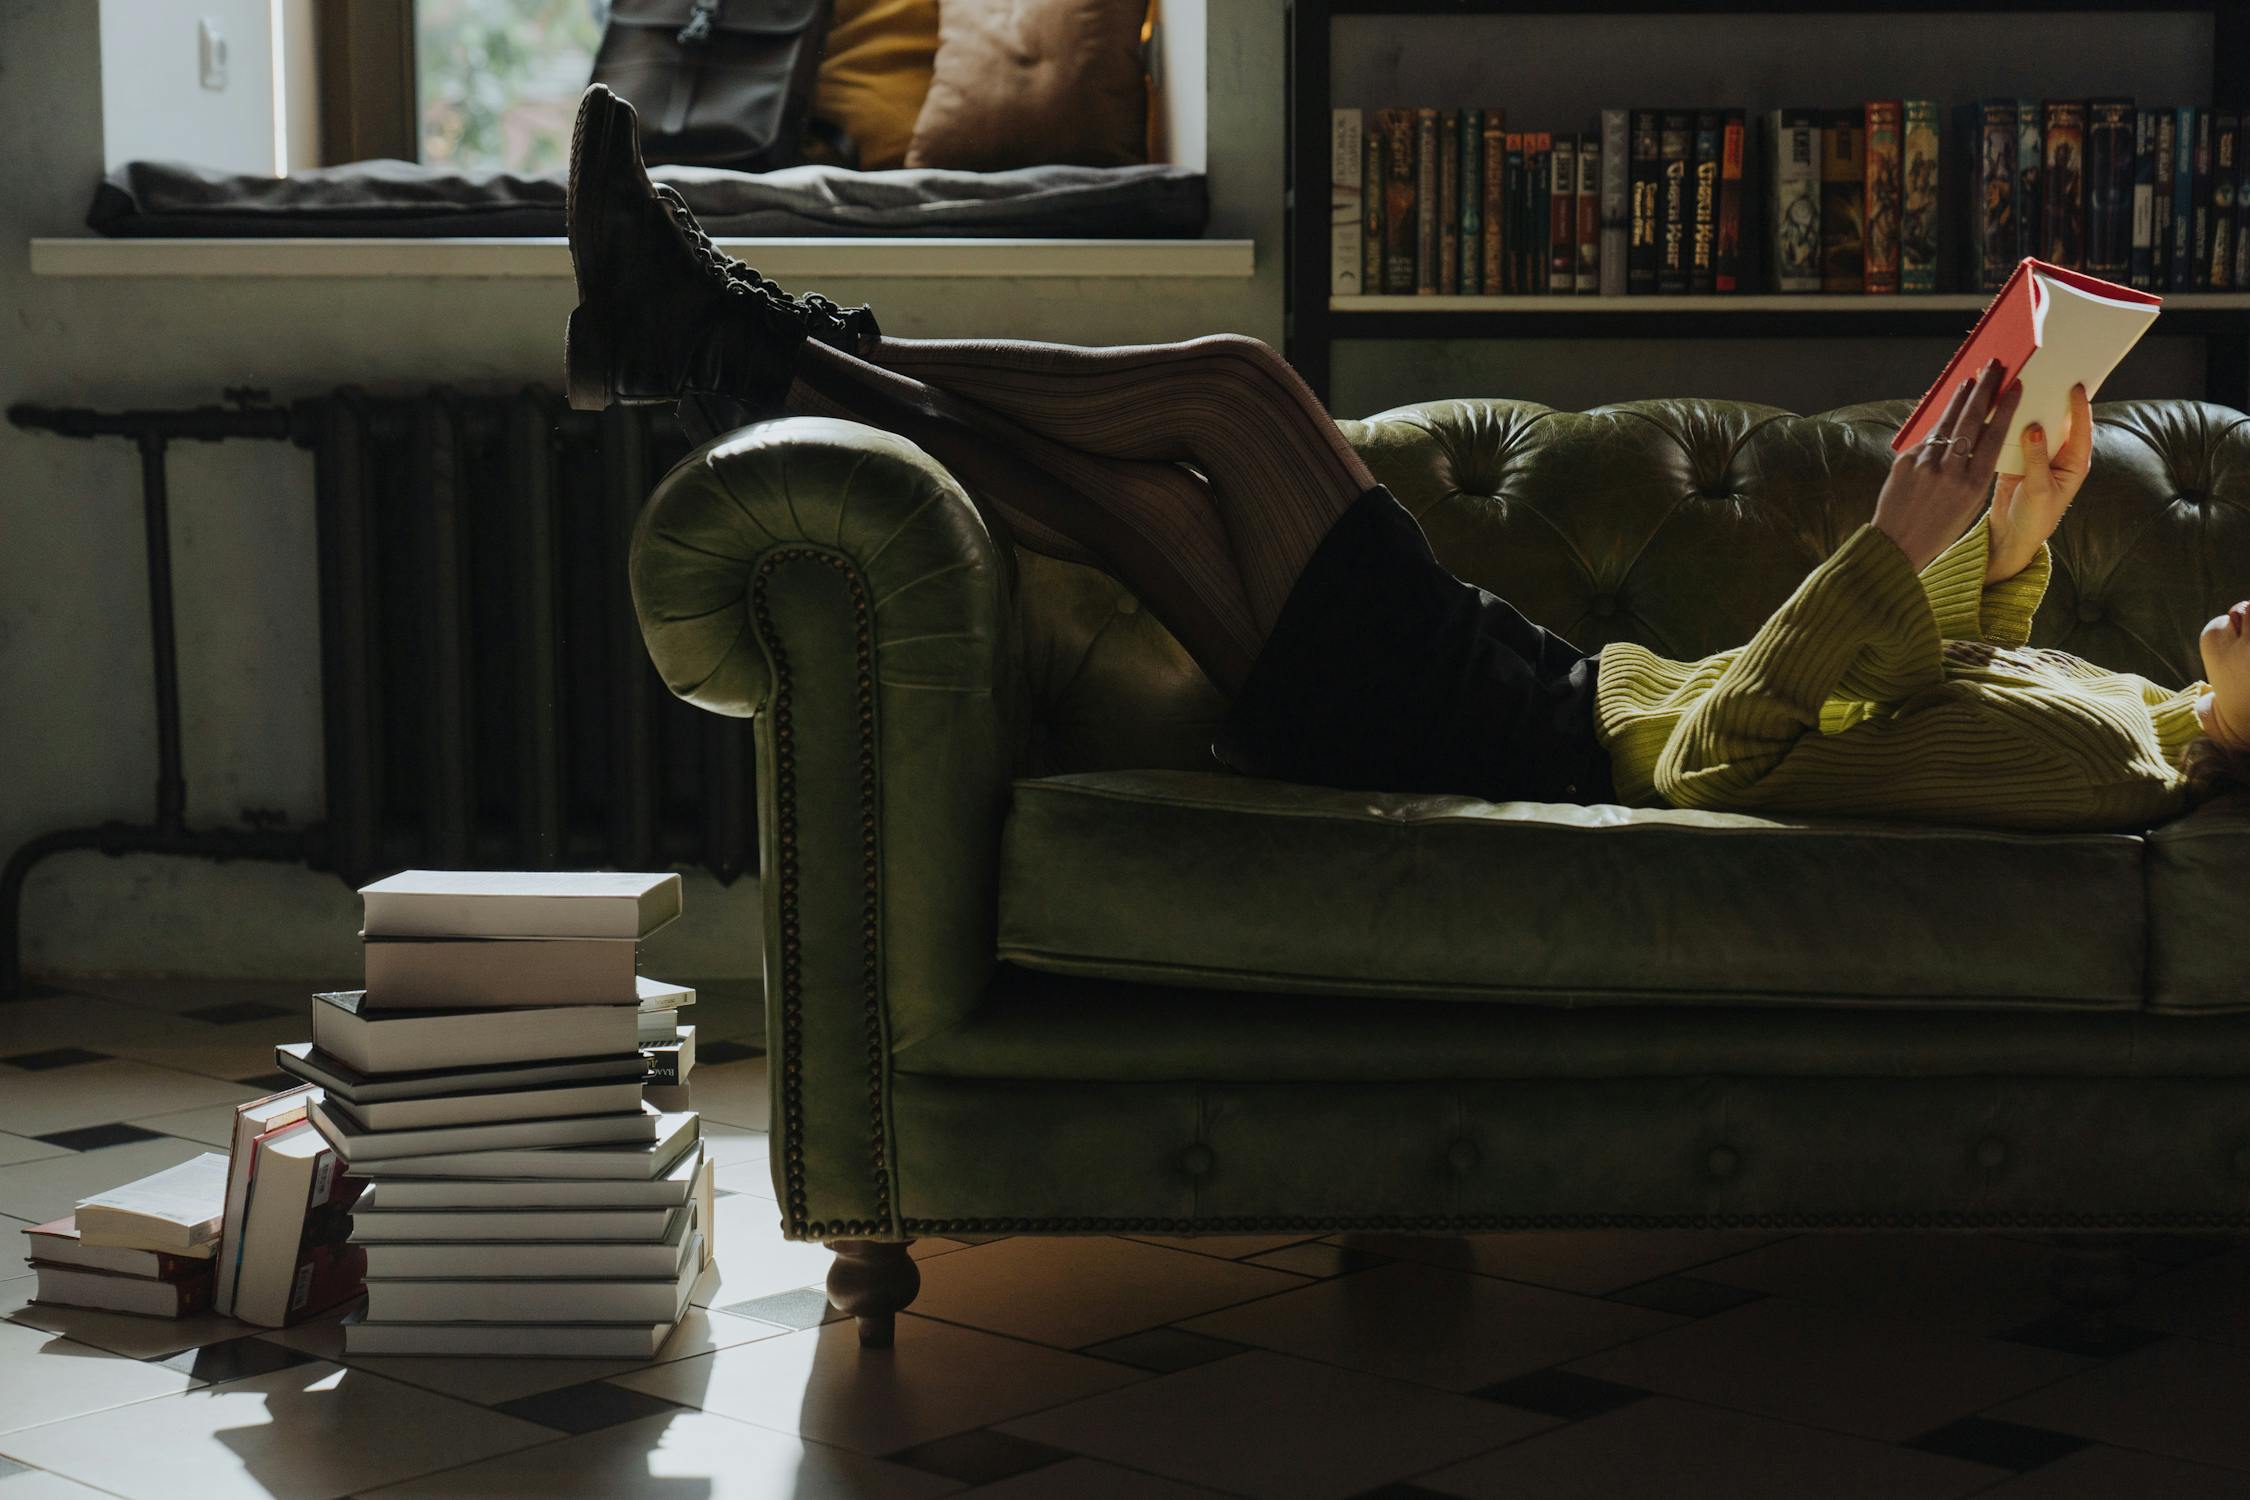 A young woman is reading a book on a sofa next to stacks of books. This reminds me of the most important spiritual books that help me to live with purpose.